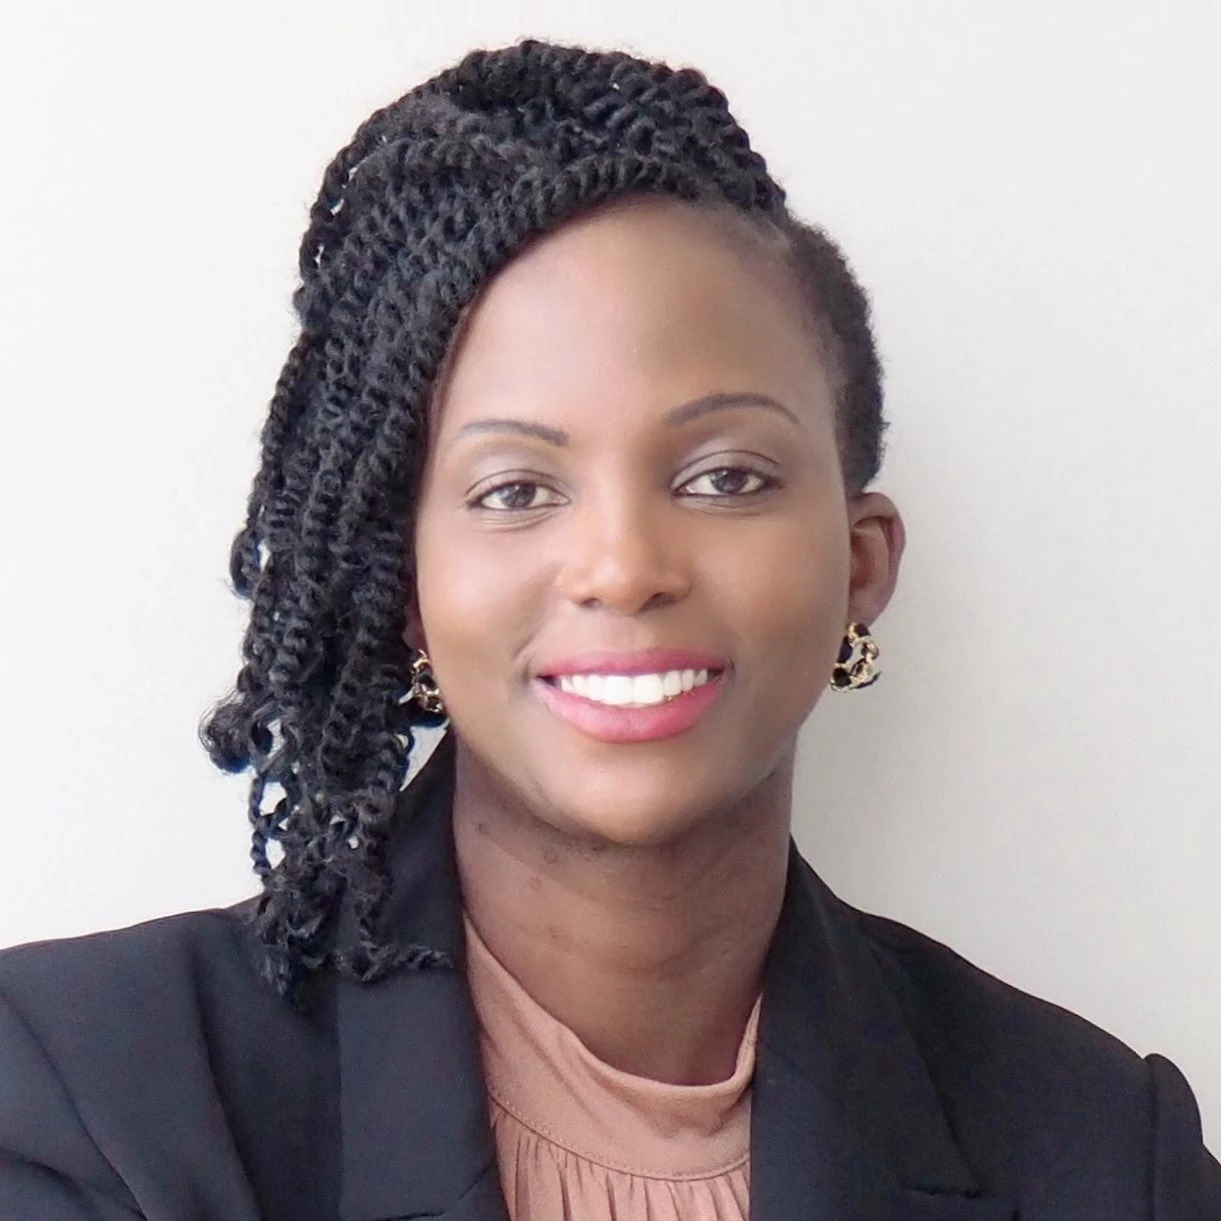 Angella Faith Montfaucon is an Economist at the Macroeconomic, Trade and Investment (MTI) Global Practice in the East Asia and Pacific